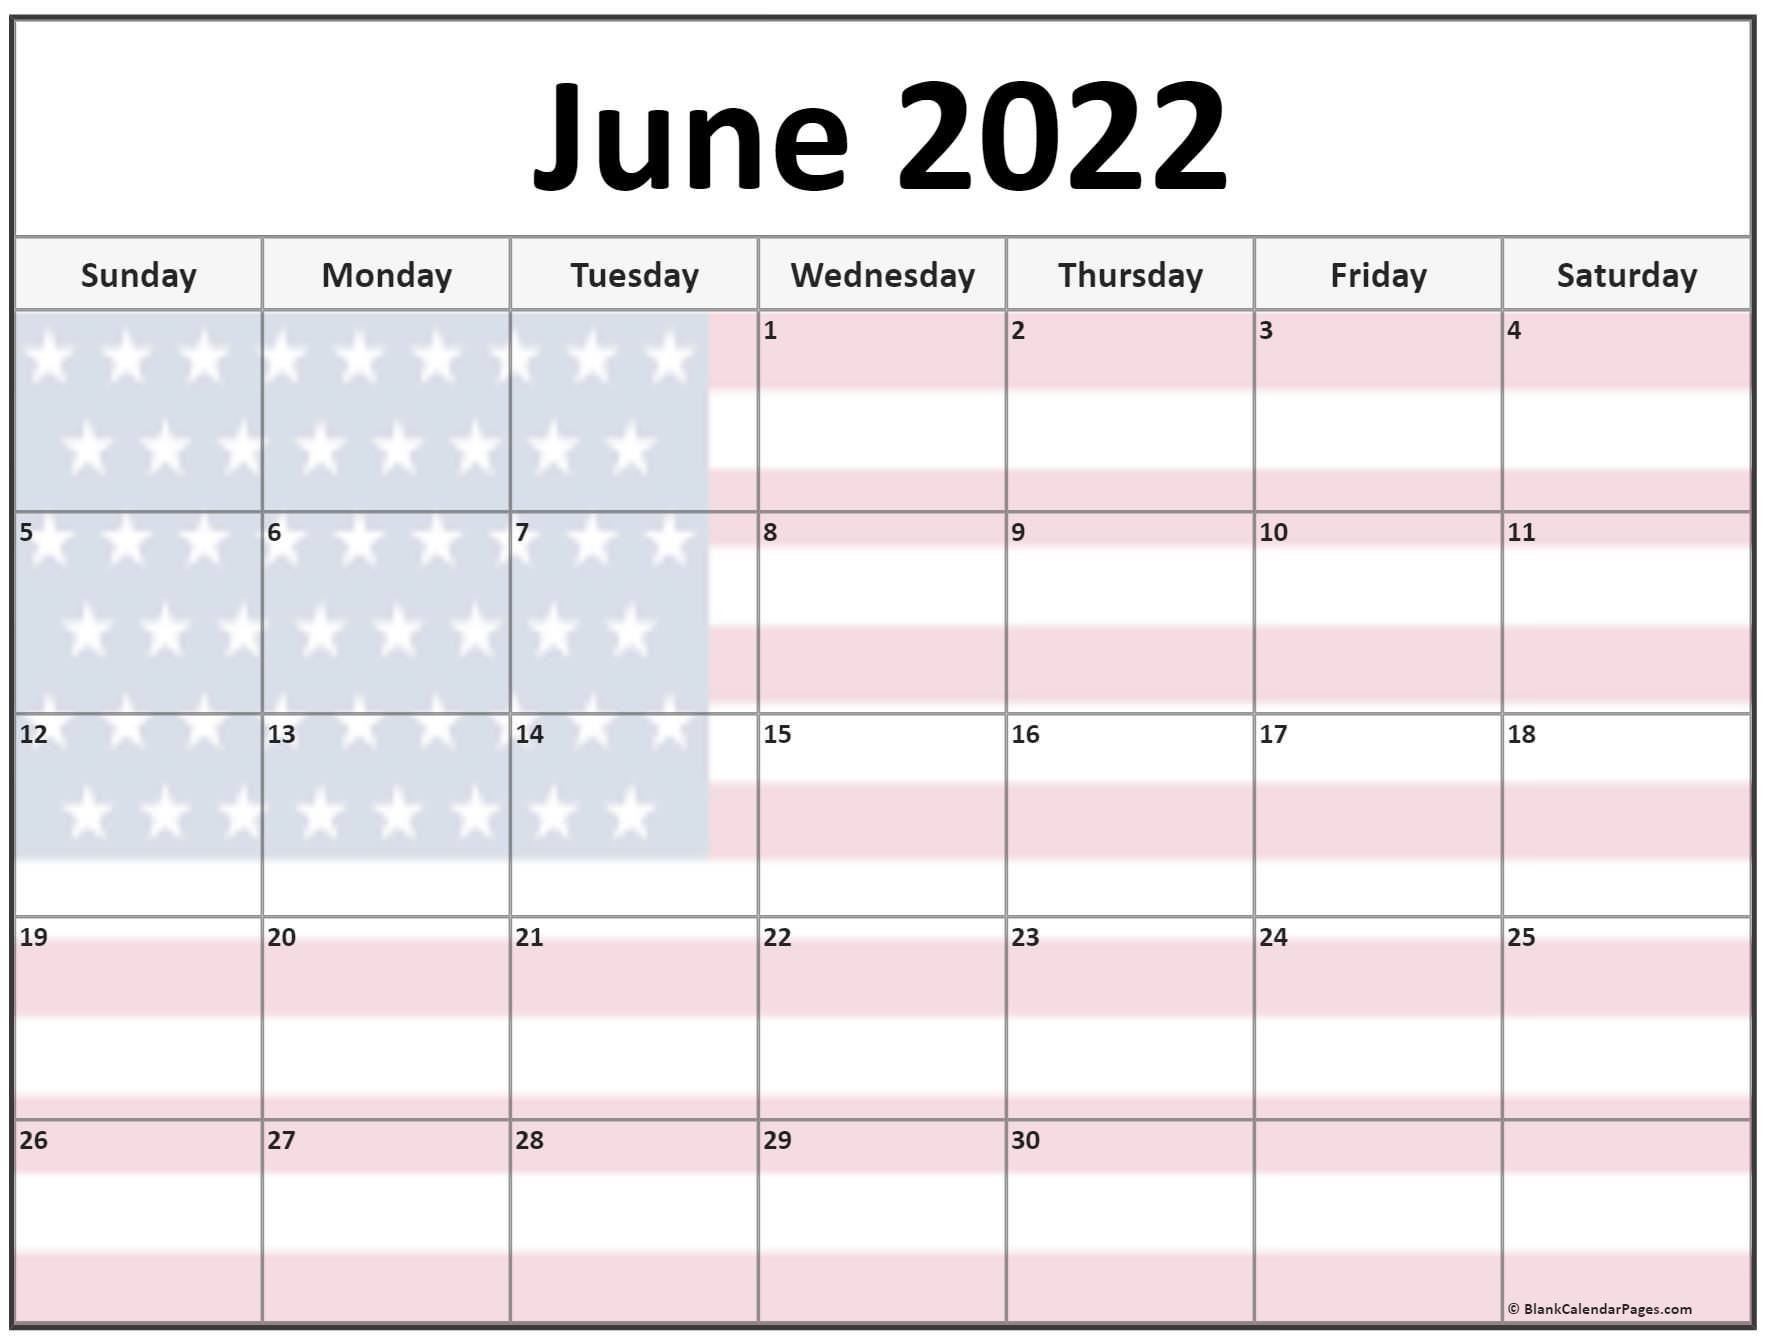 Collection Of June 2022 Photo Calendars With Image Filters.  Calendar Jan To June 2022